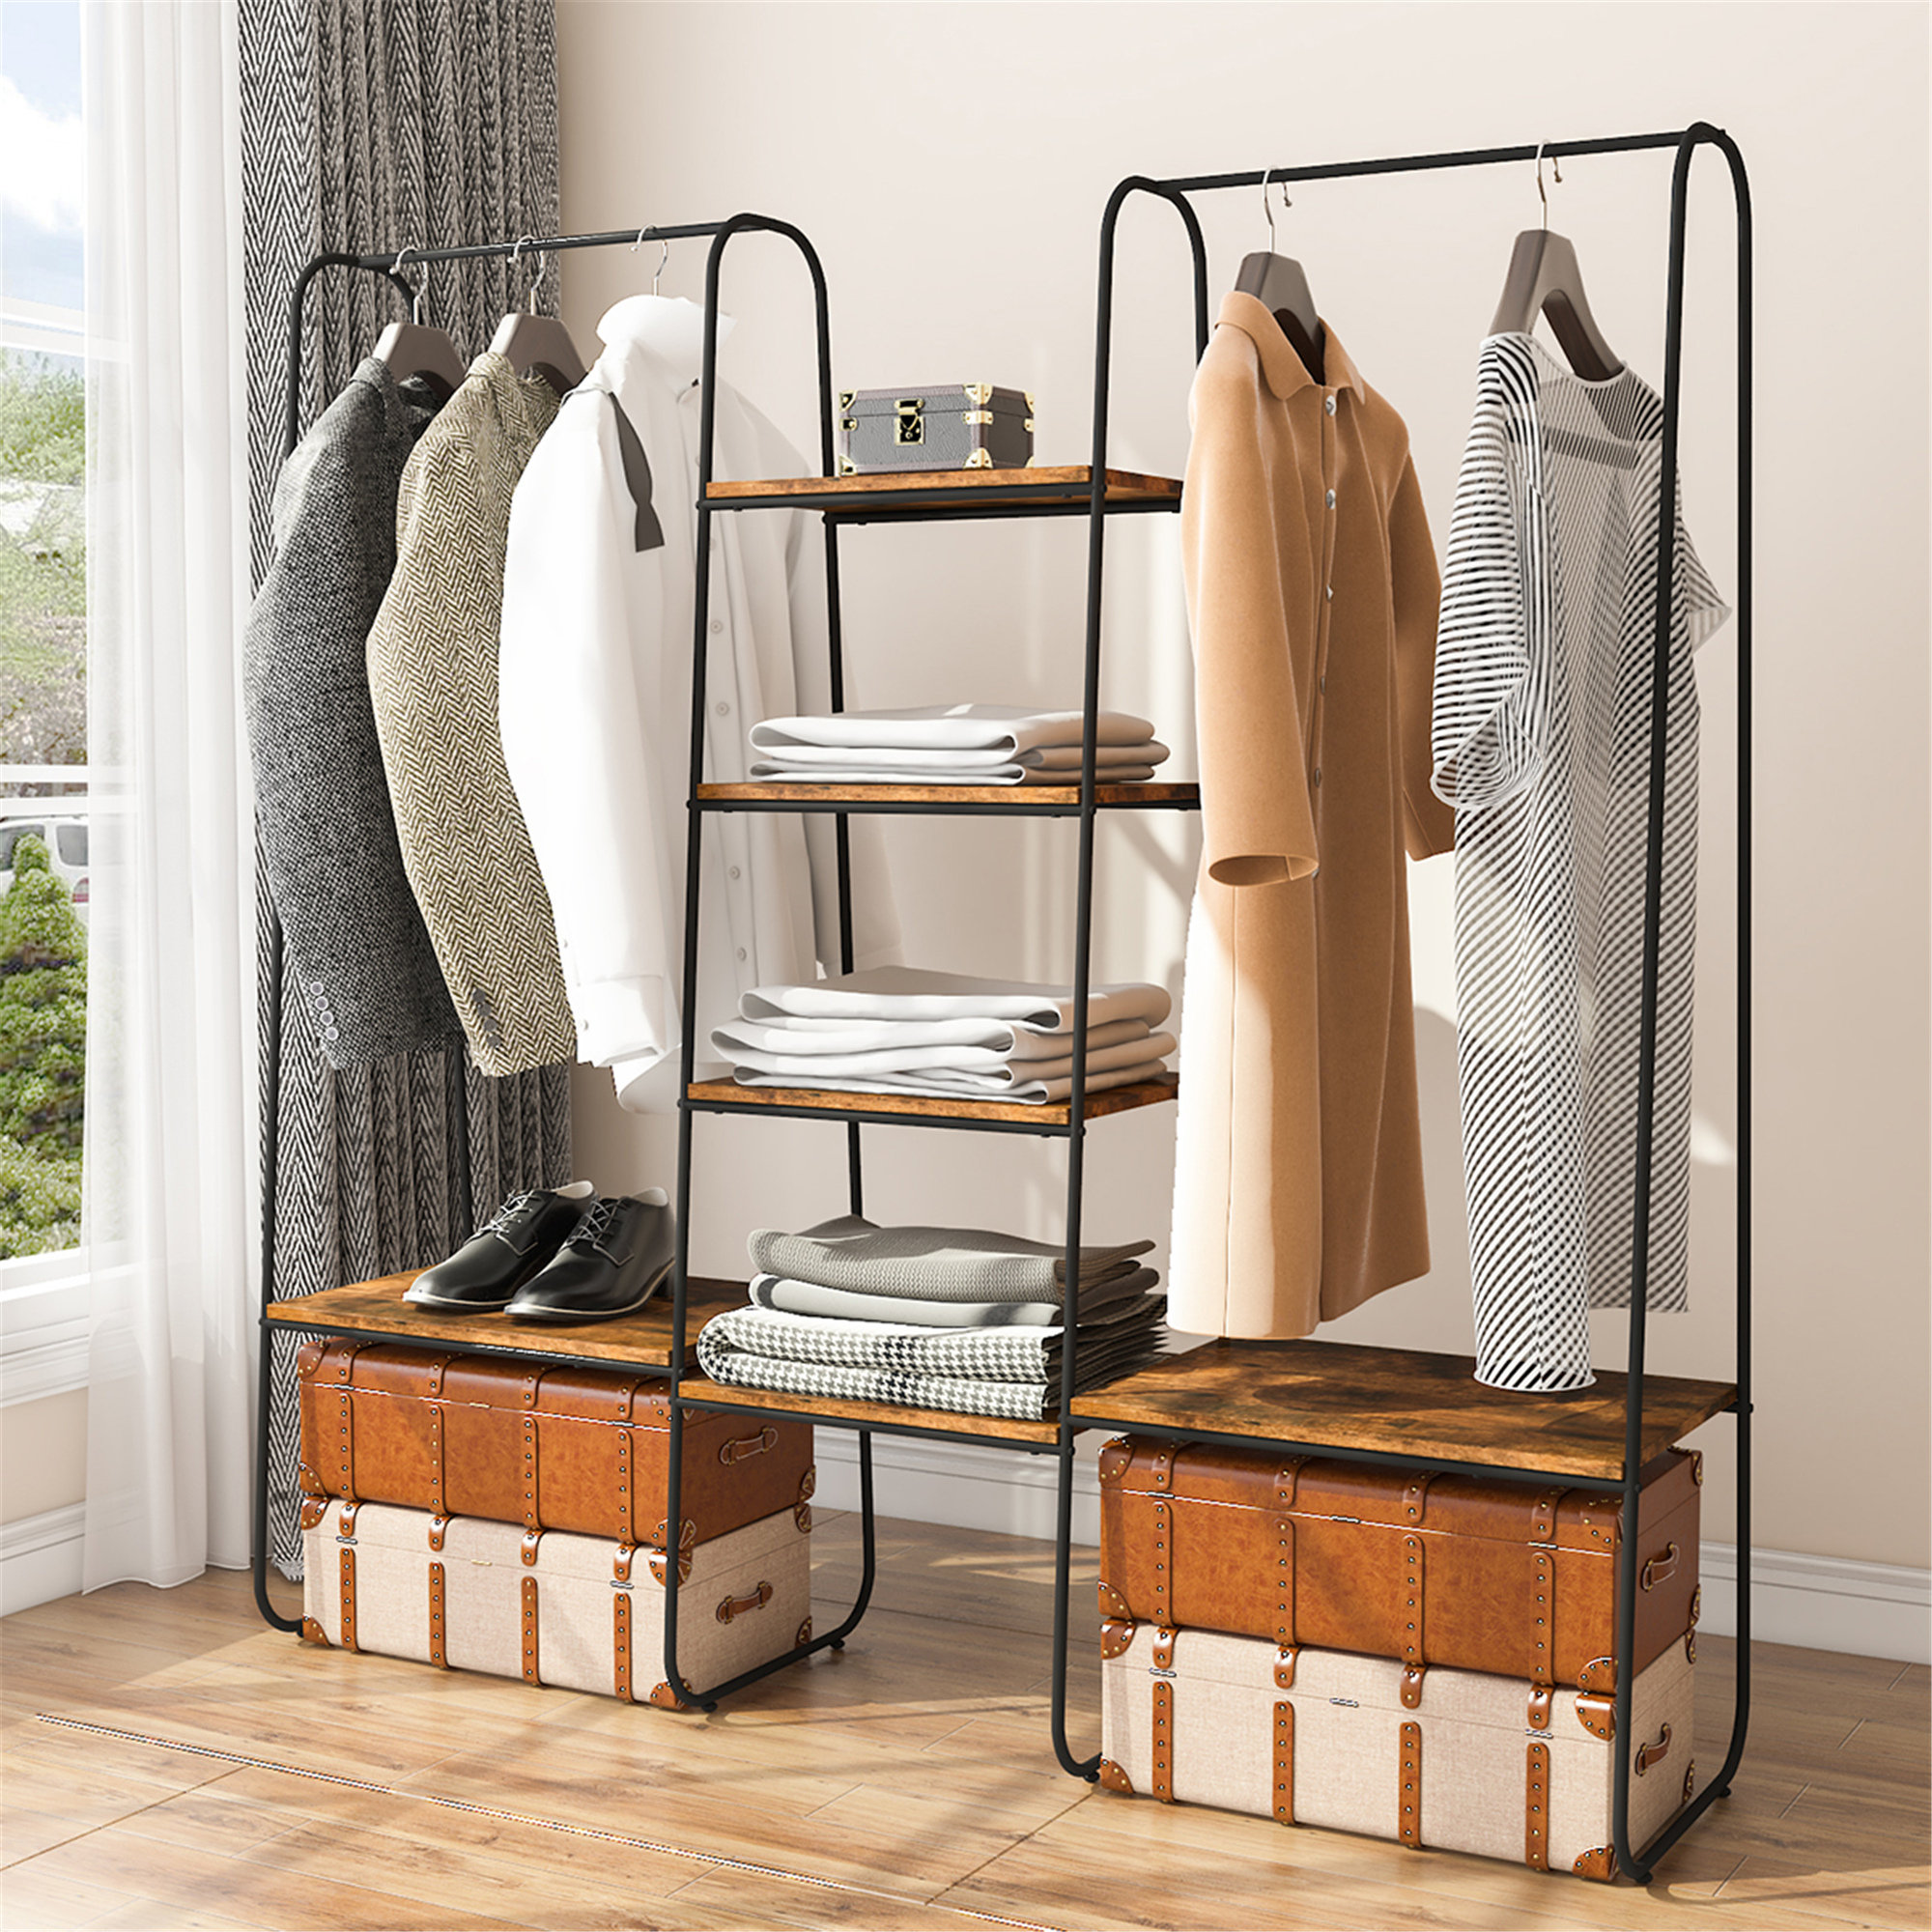 Honey-Can-Do Black/Natural Freestanding Metal Clothing Rack with Wood Shelves